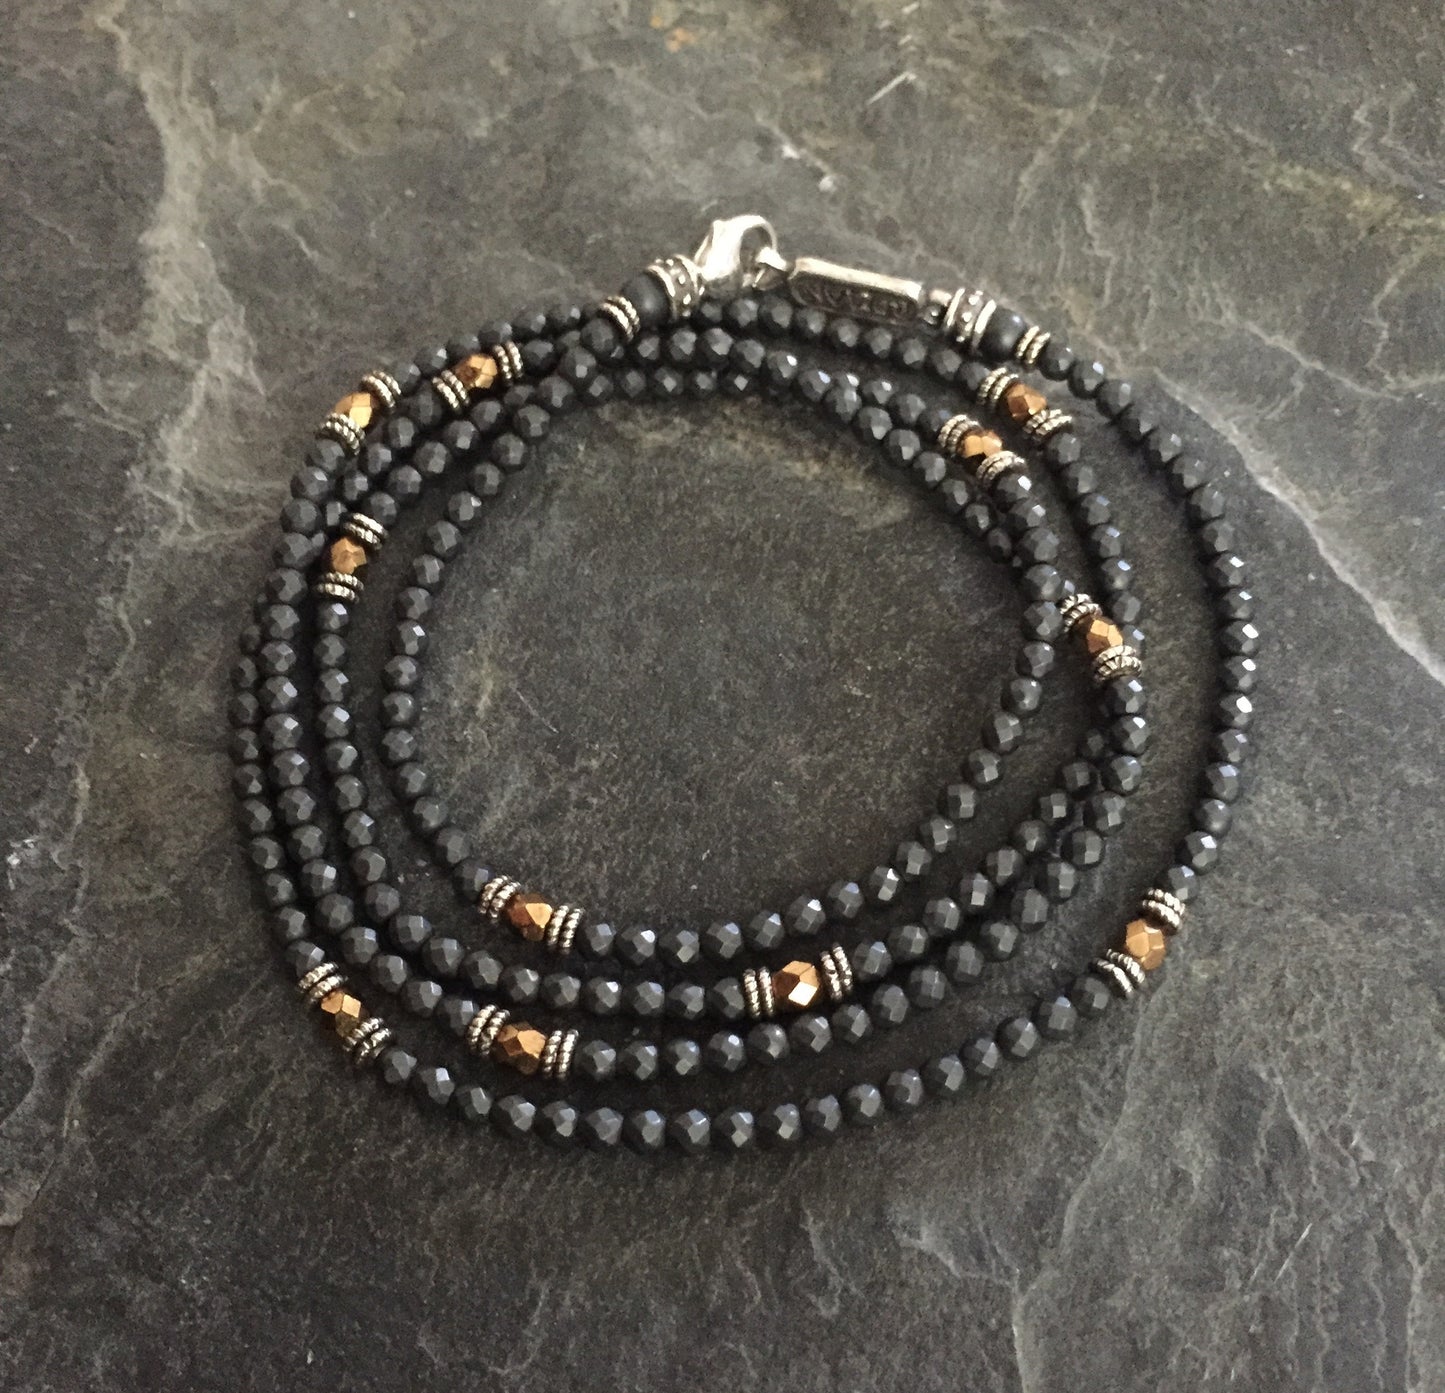 Black onyx and Metal Coated art Beads by RP